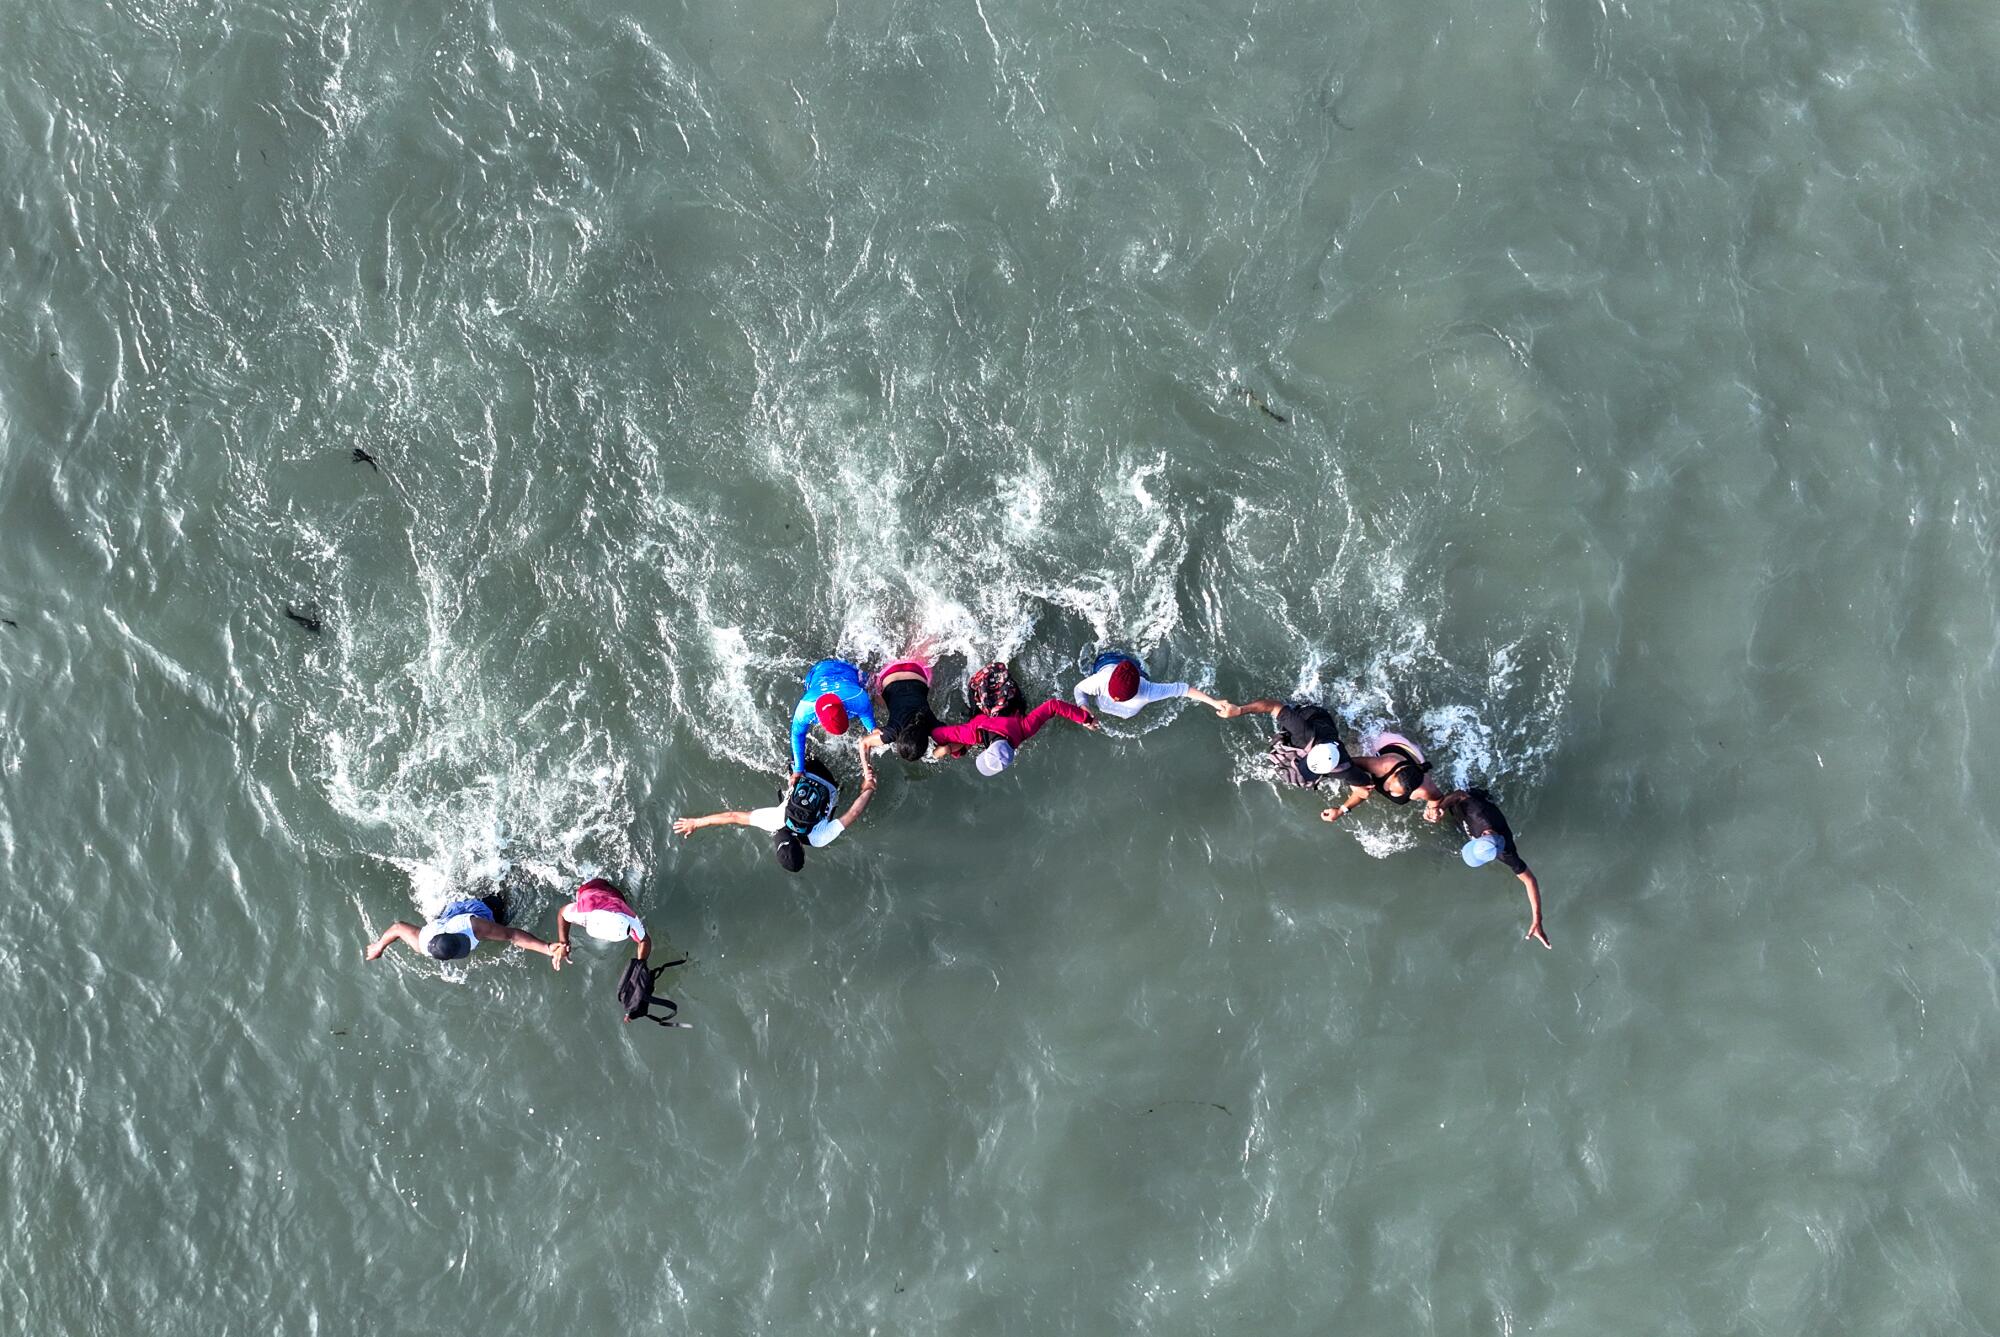  An overhead view of people walking in a line through water